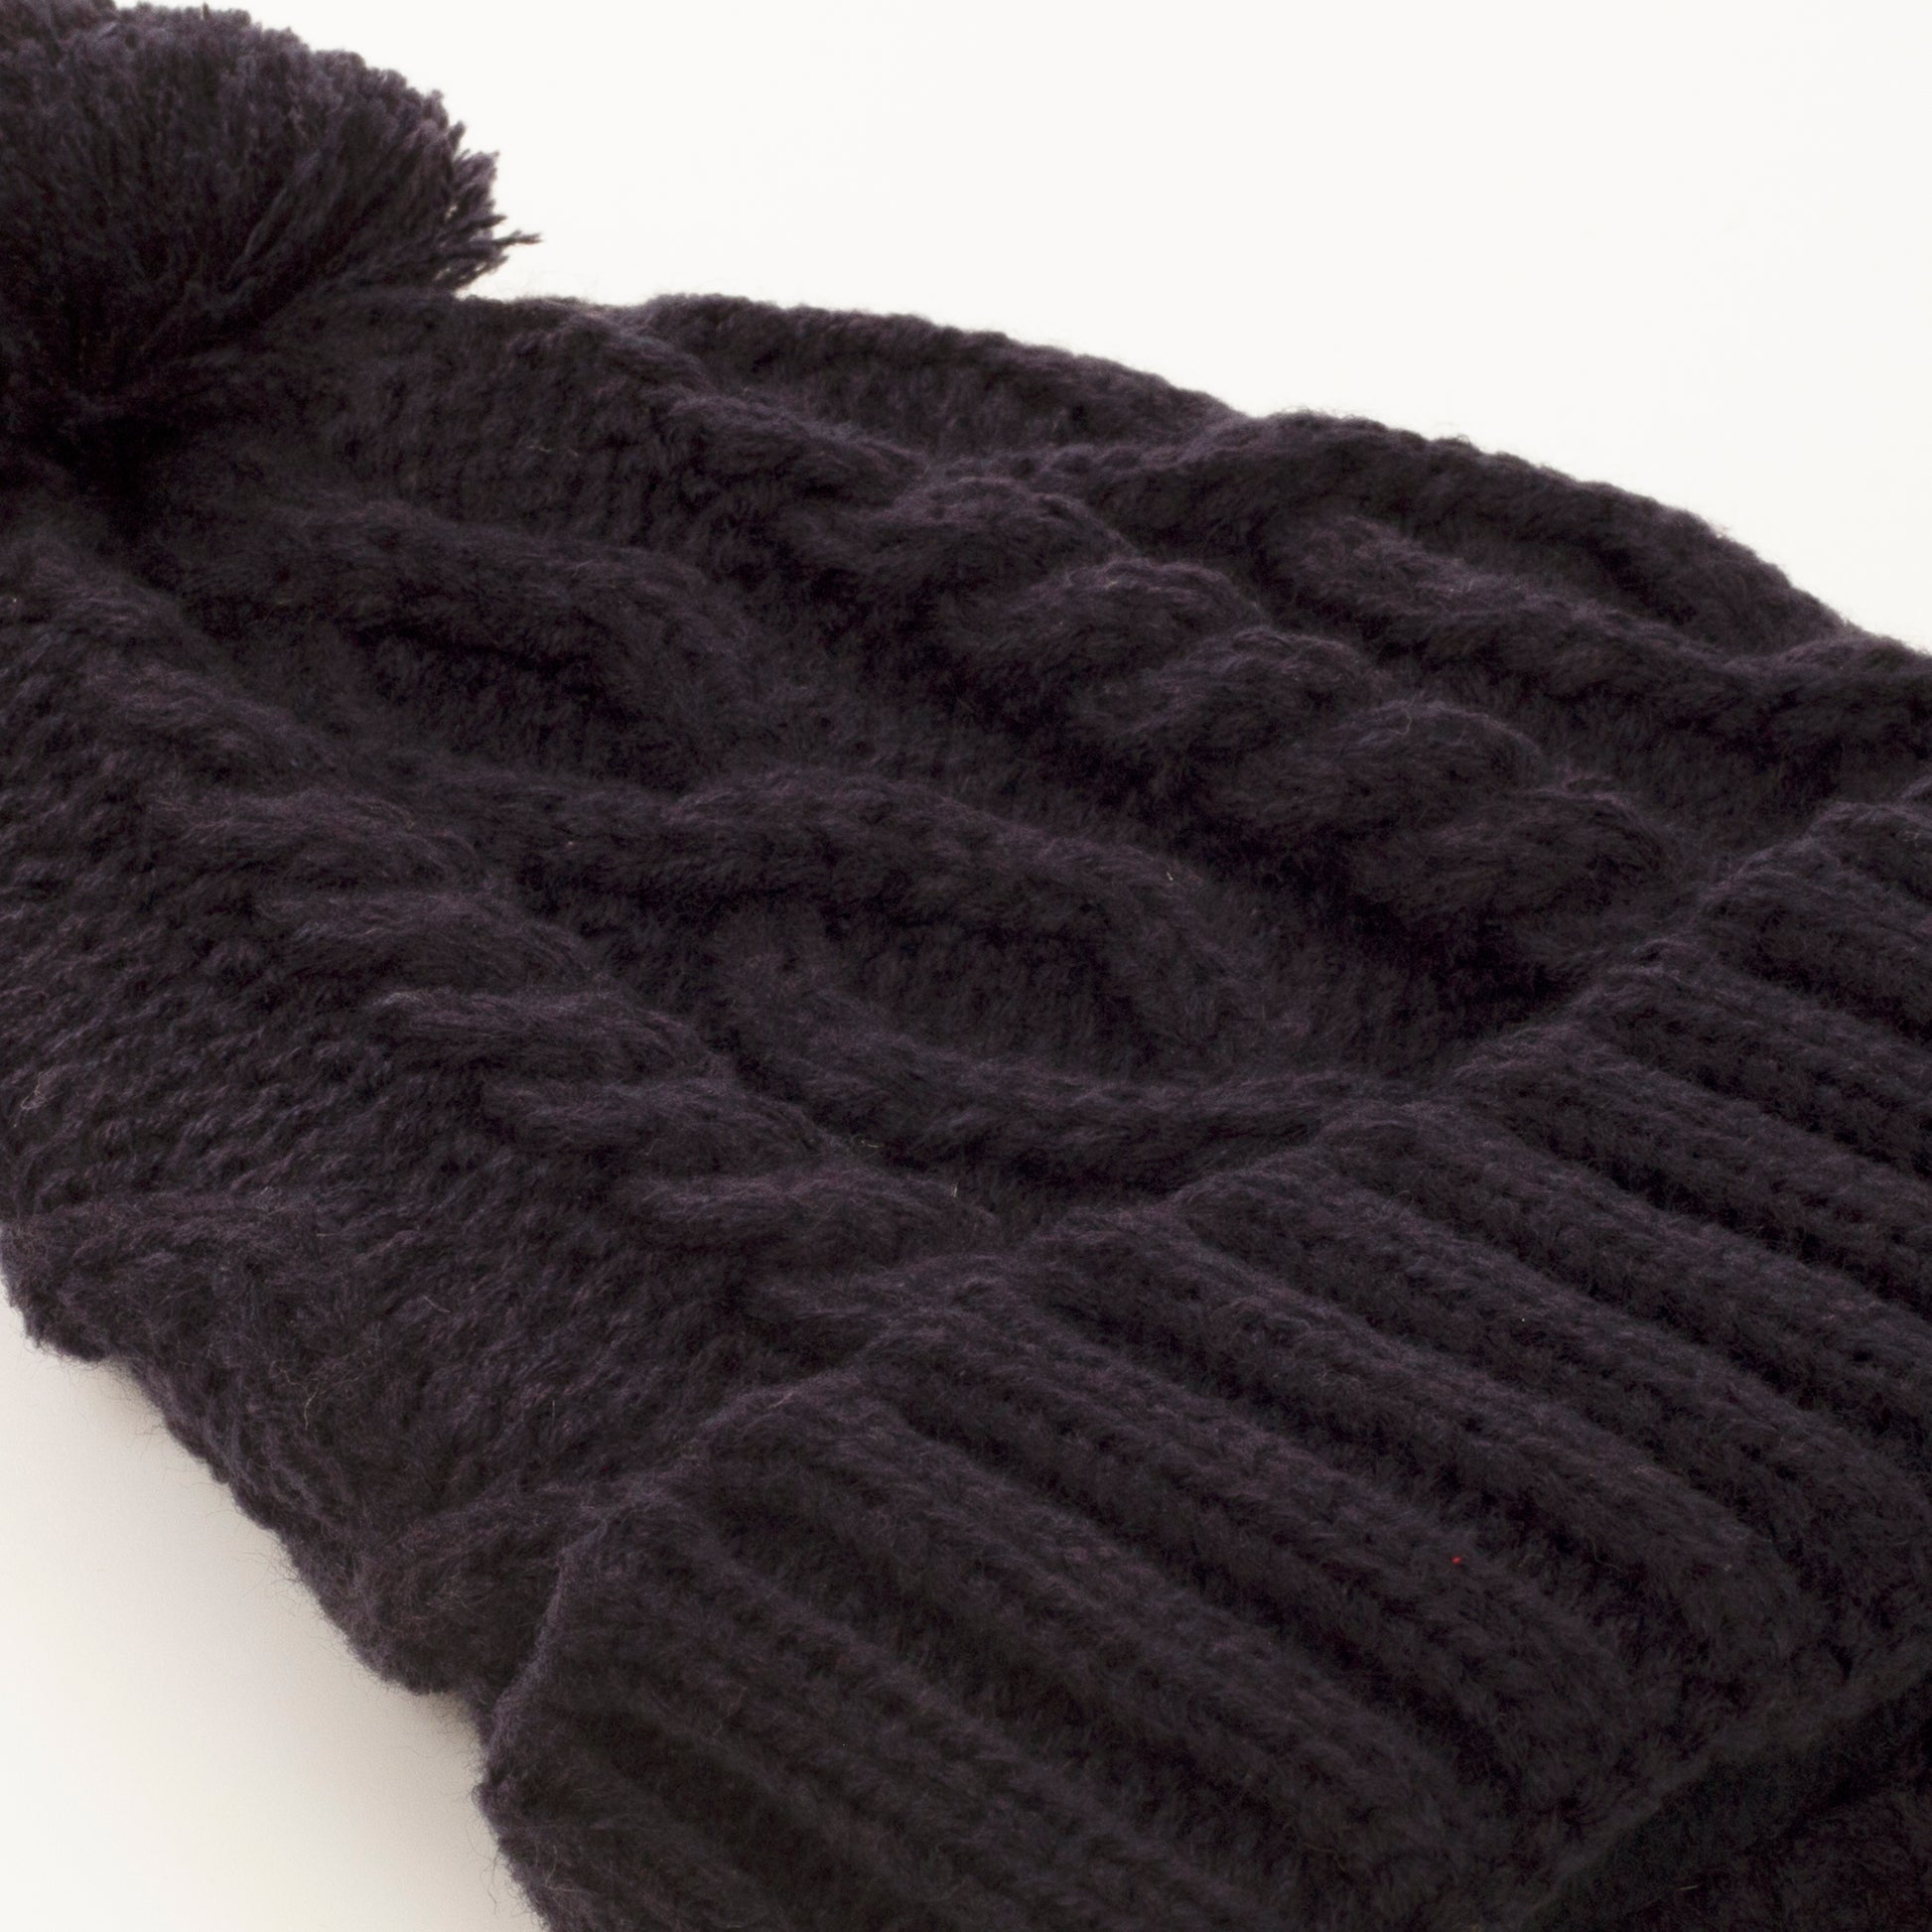 Green Lamb Ladies Krista Fleece Lined Cable Hat with Pom Pom in Black